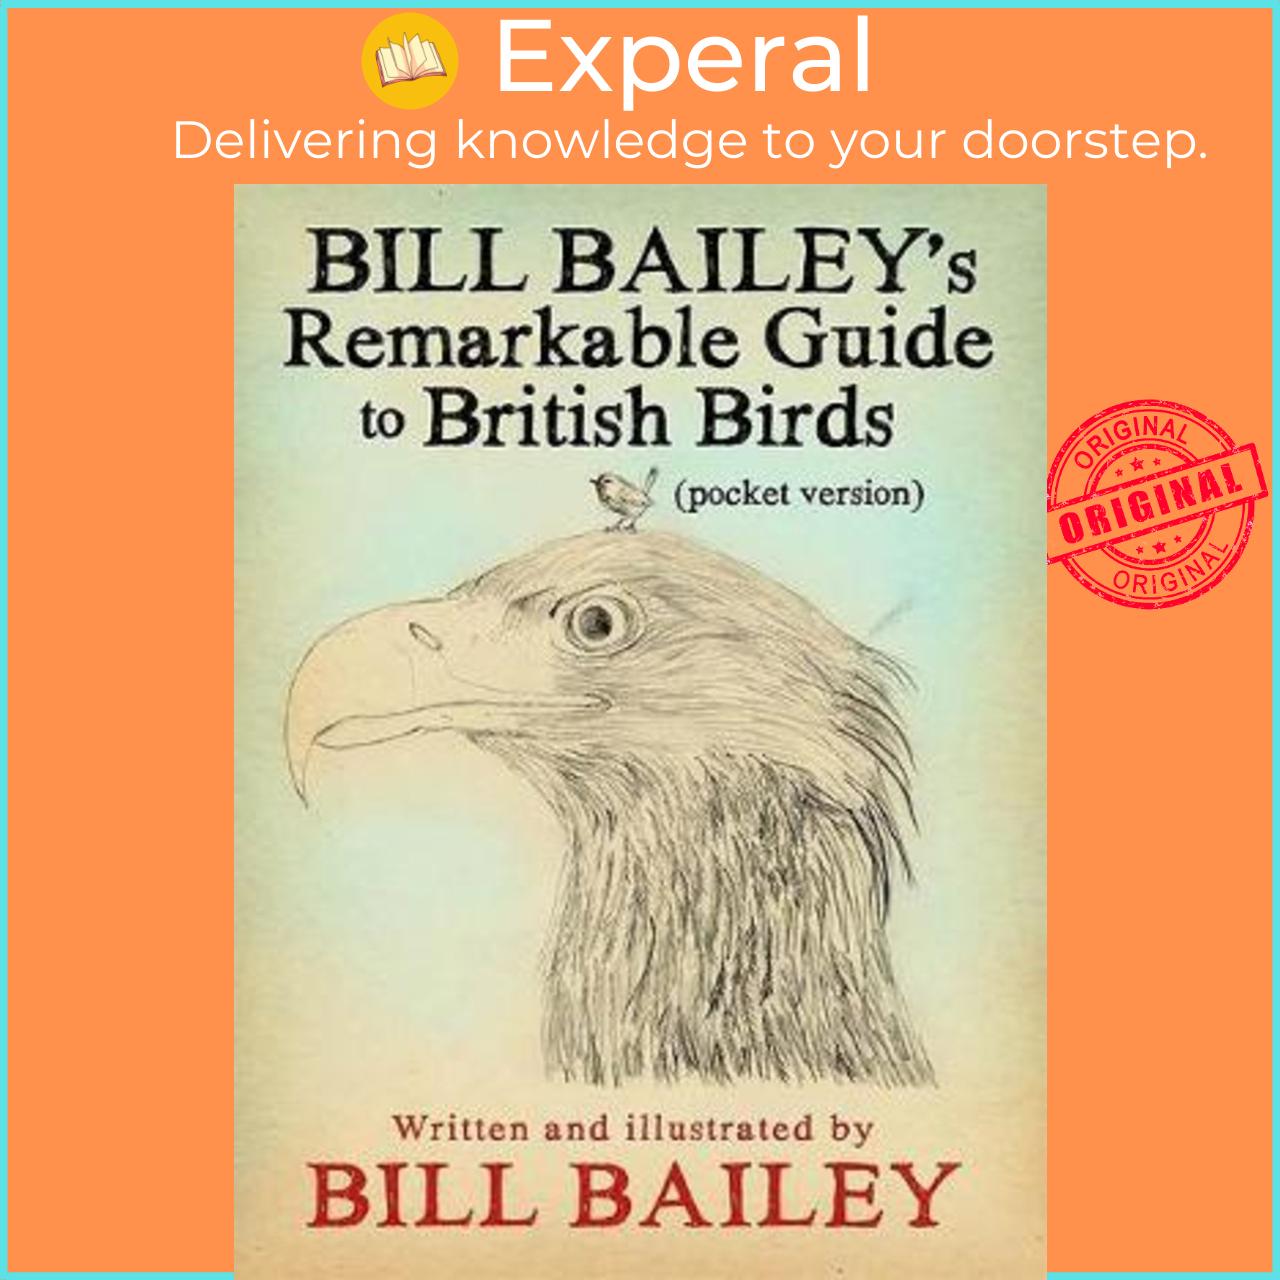 Sách - Bill Bailey's Remarkable Guide to British Birds by Bill Bailey (UK edition, paperback)